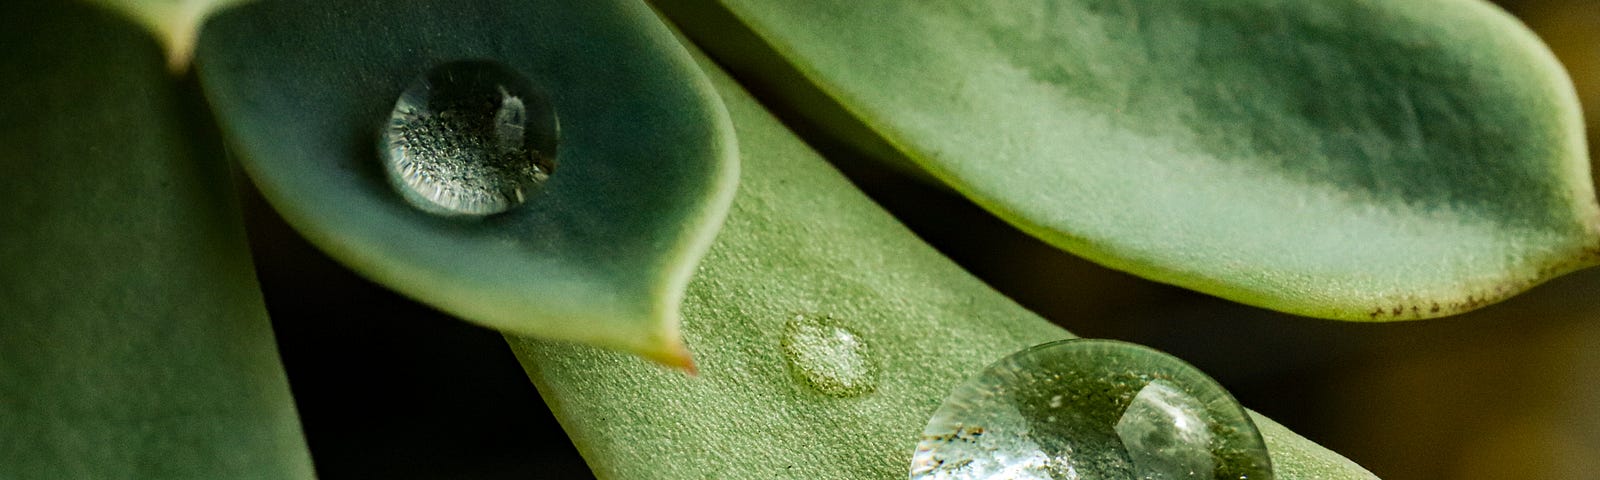 A close up of a water droplet on a plant’s leaf